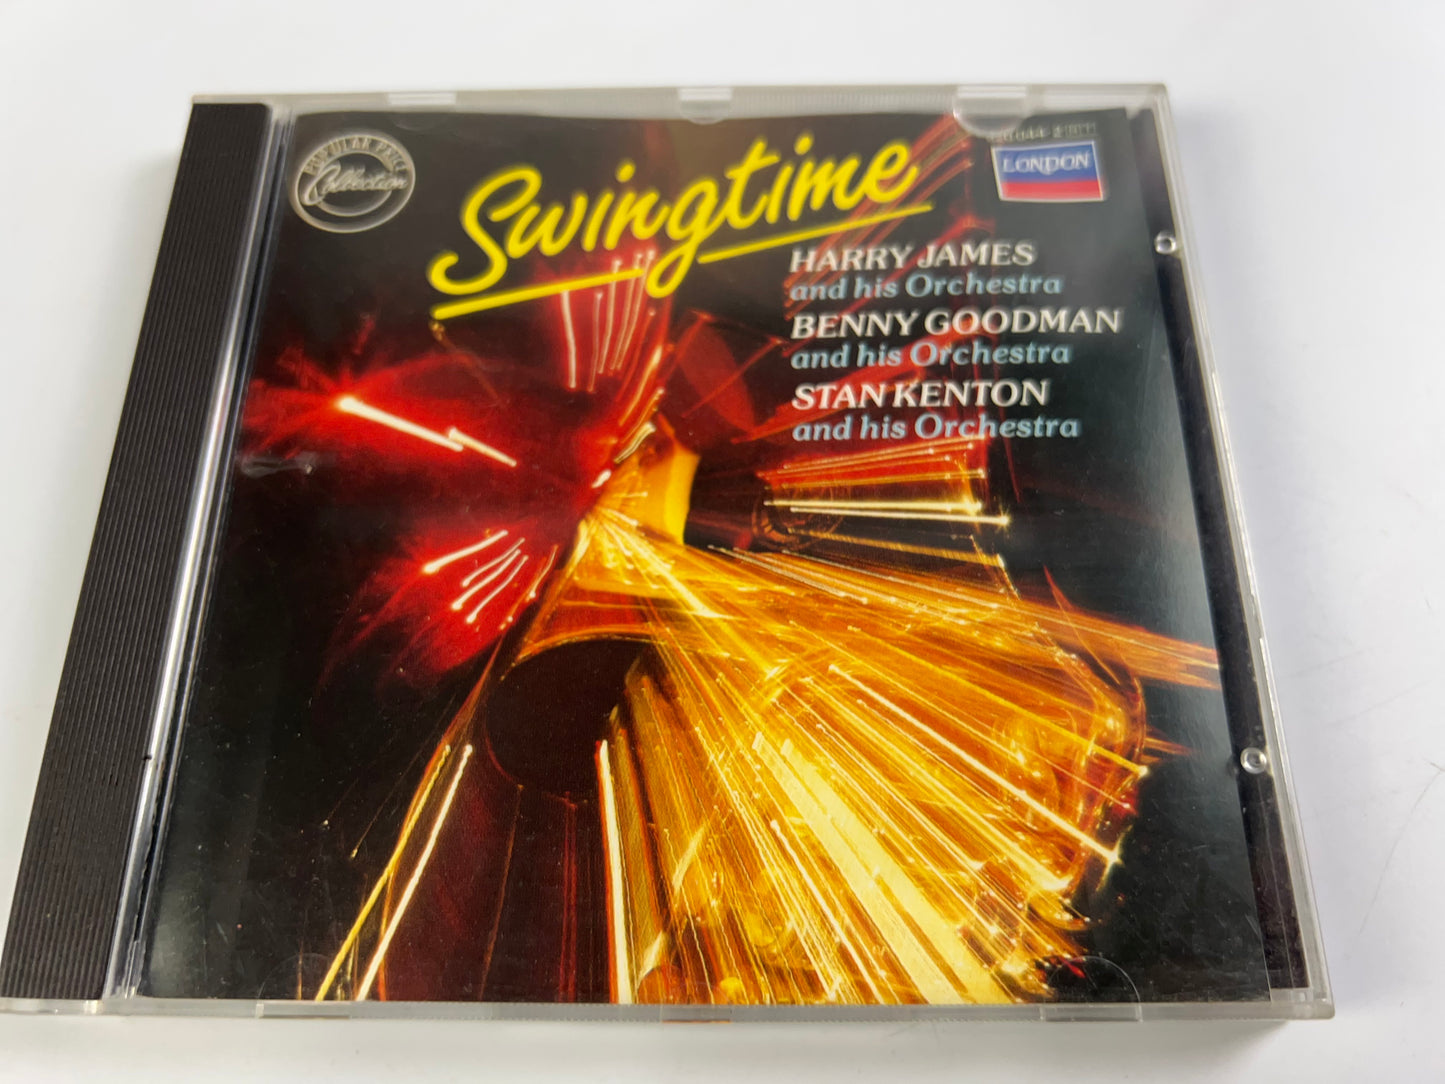 Swingtime - Audio CD By Harry James (Orch.)